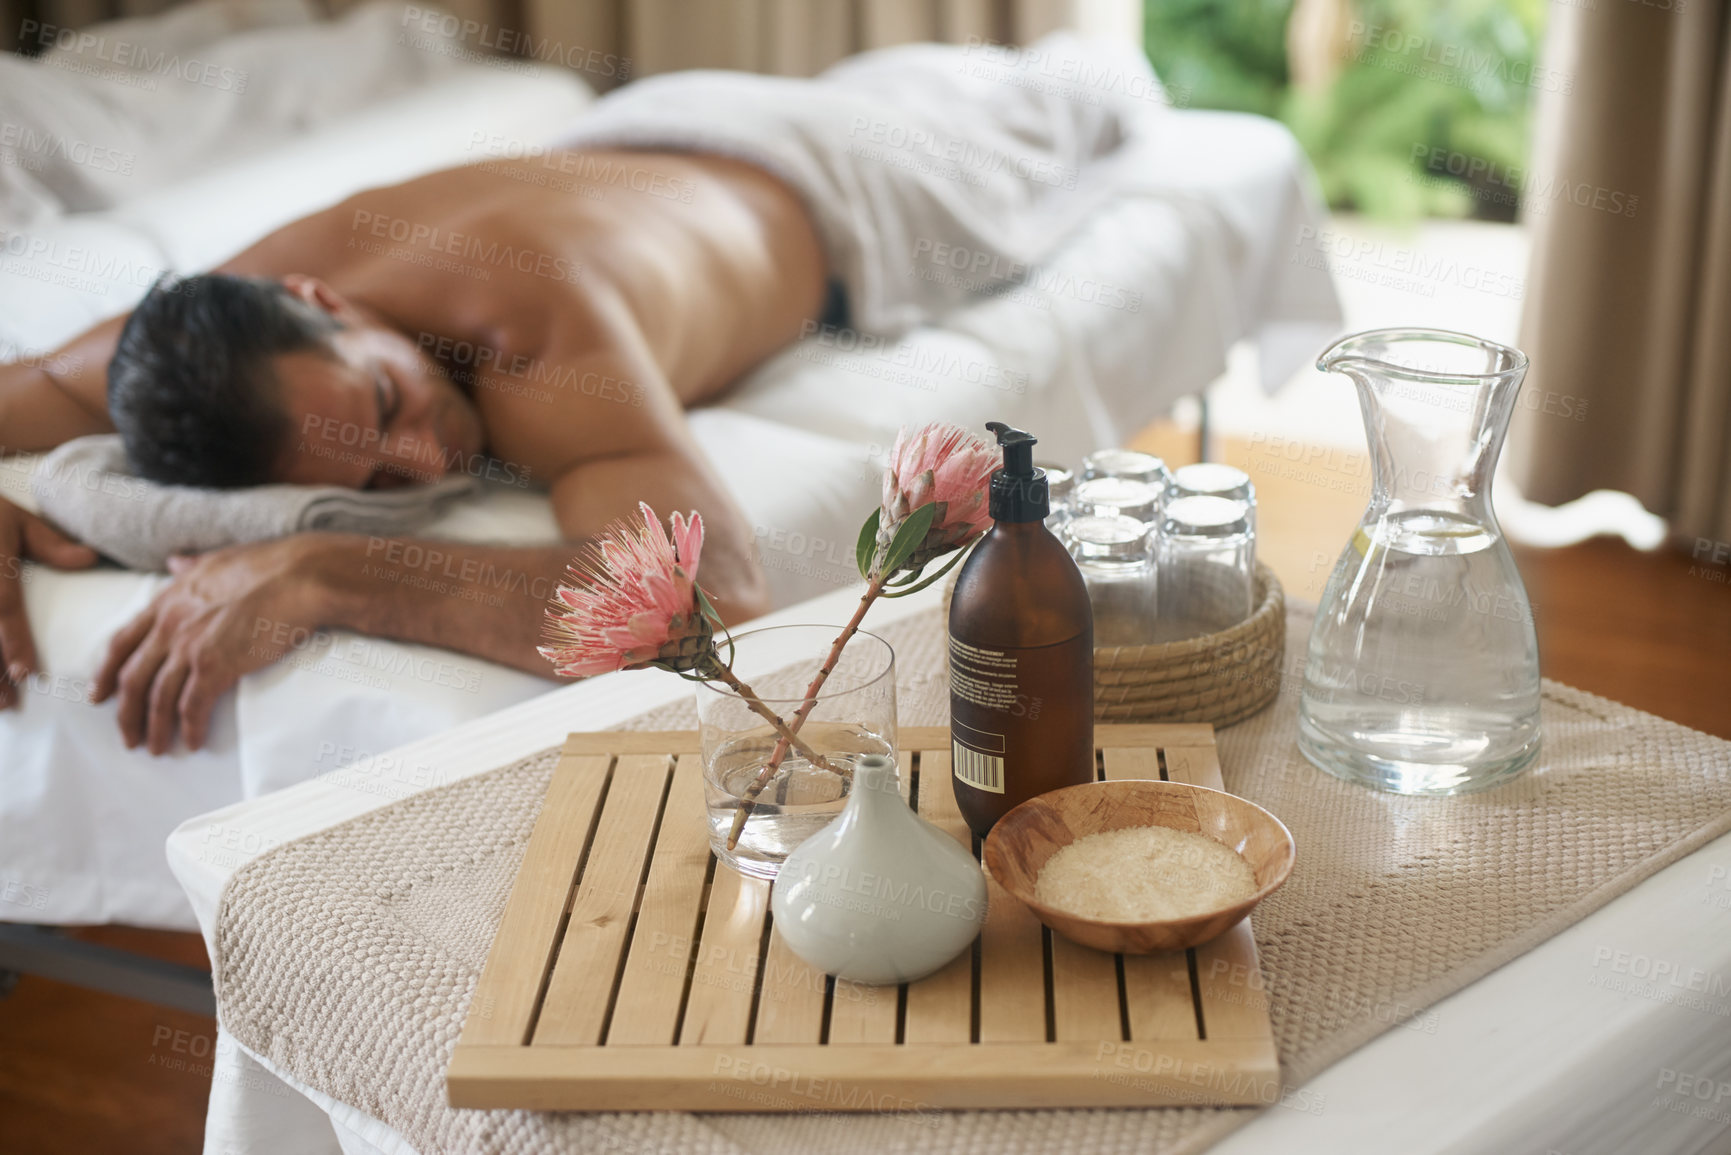 Buy stock photo Salt, flowers and man in spa to relax on bed or break with luxury pamper treatment tools on table. Protea, facial oil or person at resort and salon for natural healing benefits or massage with water